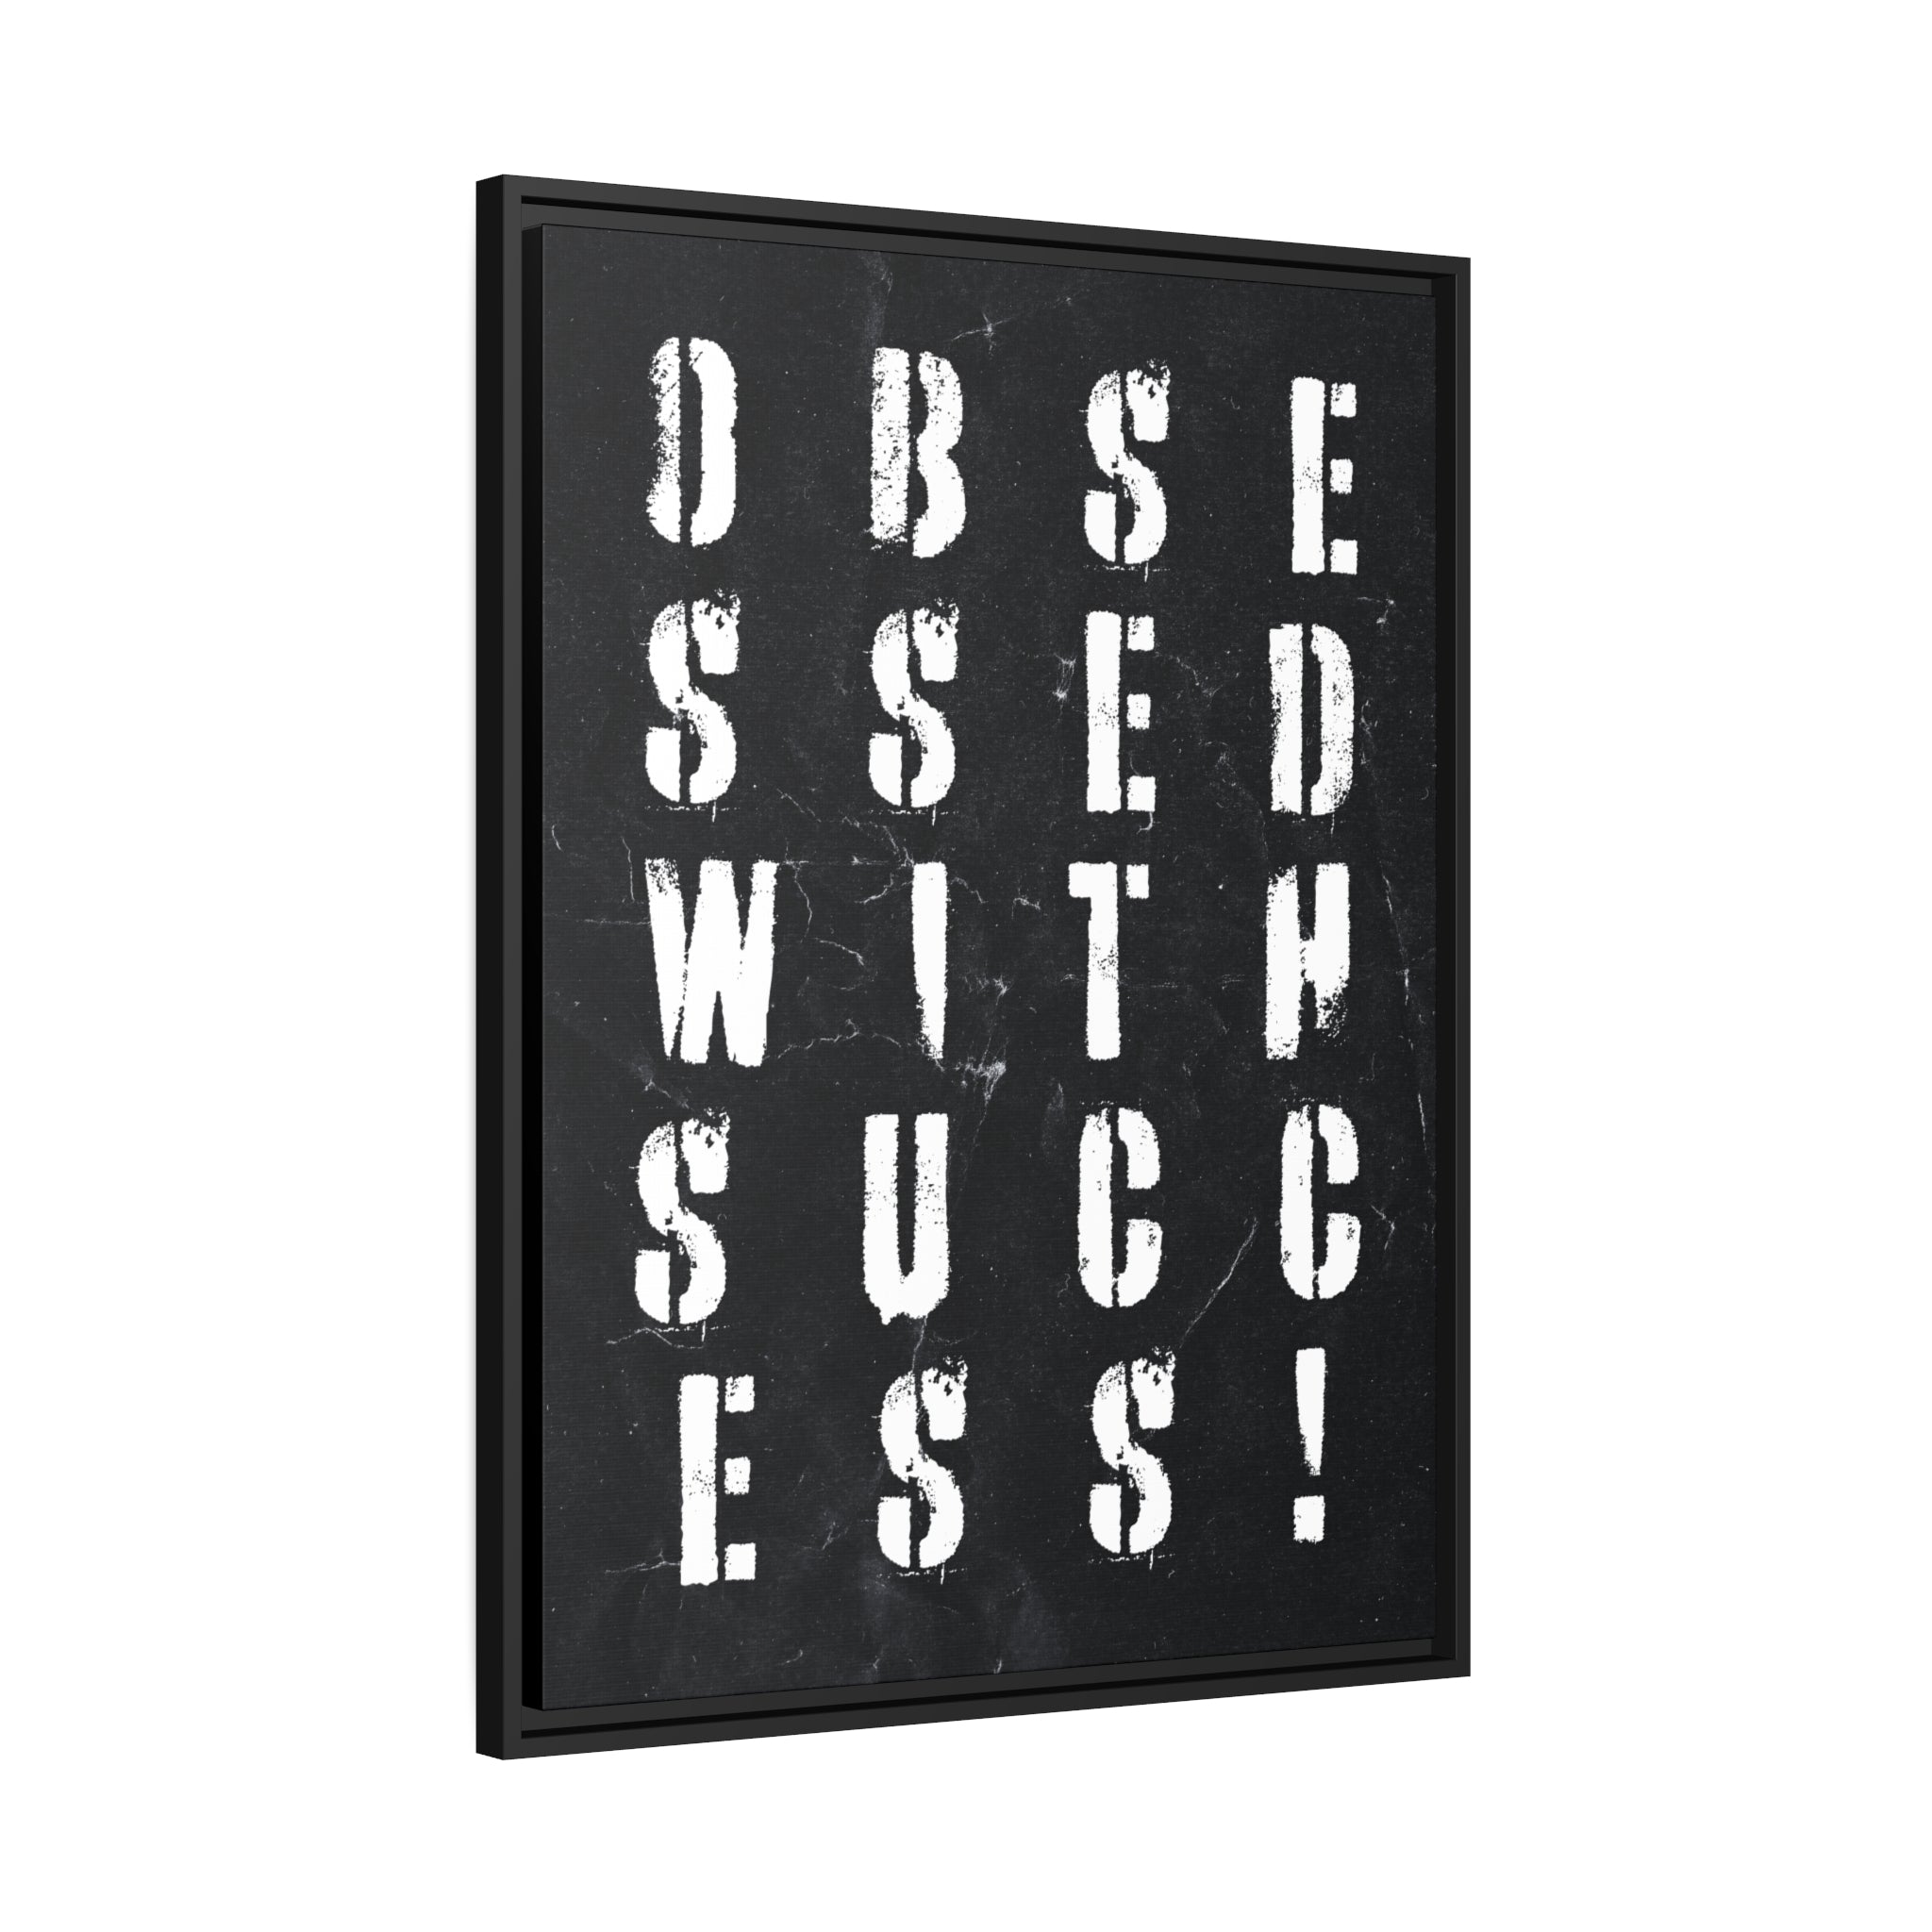 Obsessed With Success - Grid - Wall Art additional image 6